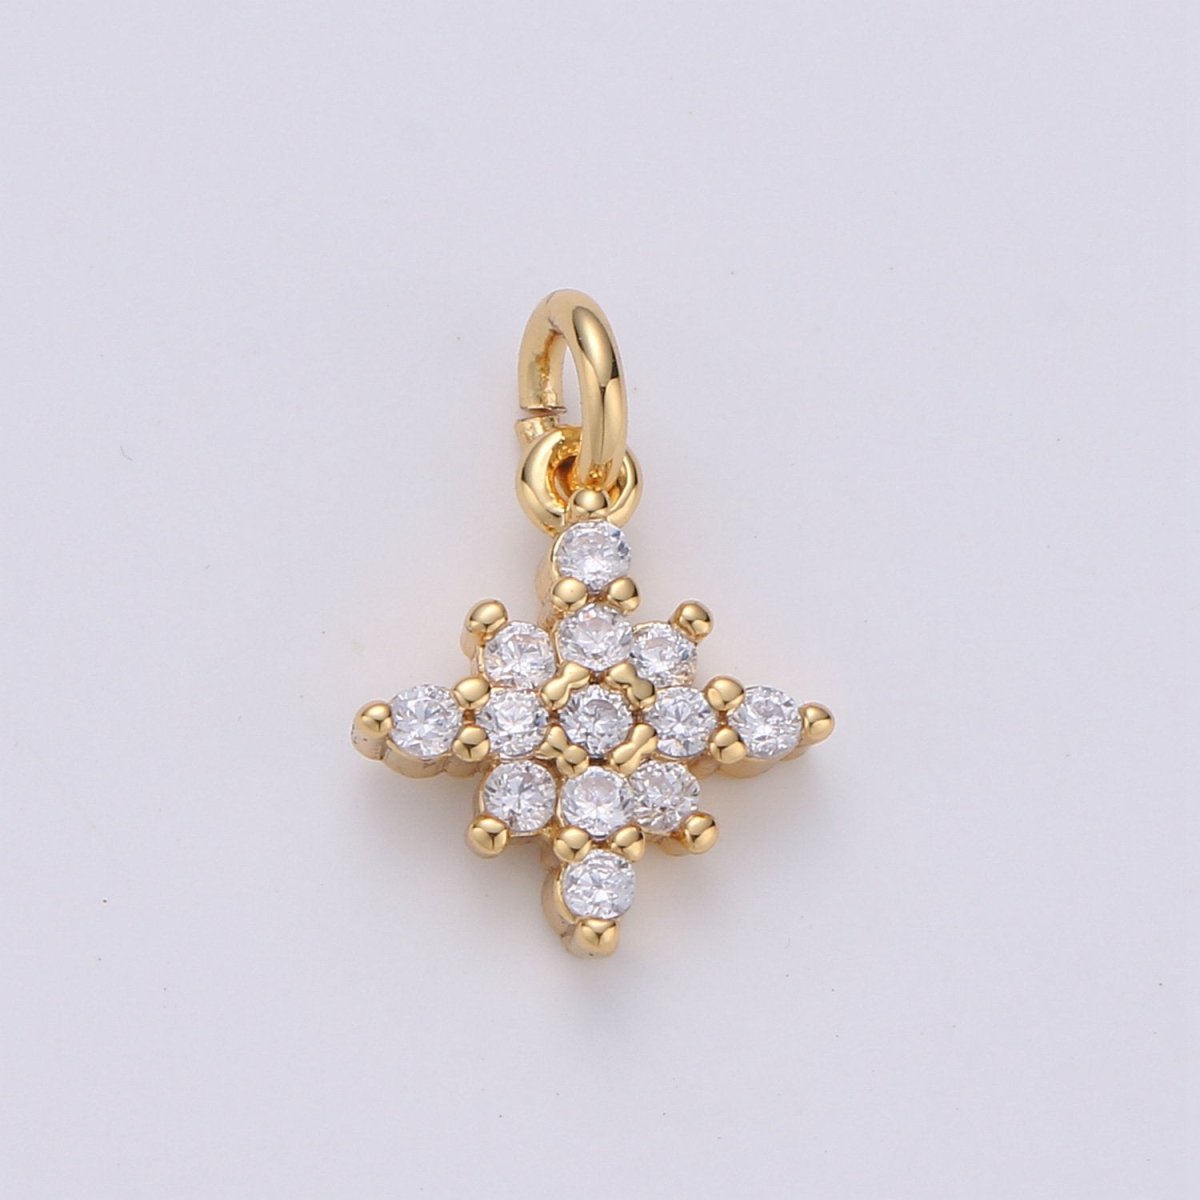 Dainty 24k Gold Filled Micro Pave CZ North Star Pendant Charm, North Star Pendant Charm, Silver Star Pendant, For DIY Jewelry Making, D-463, D-464 - DLUXCA